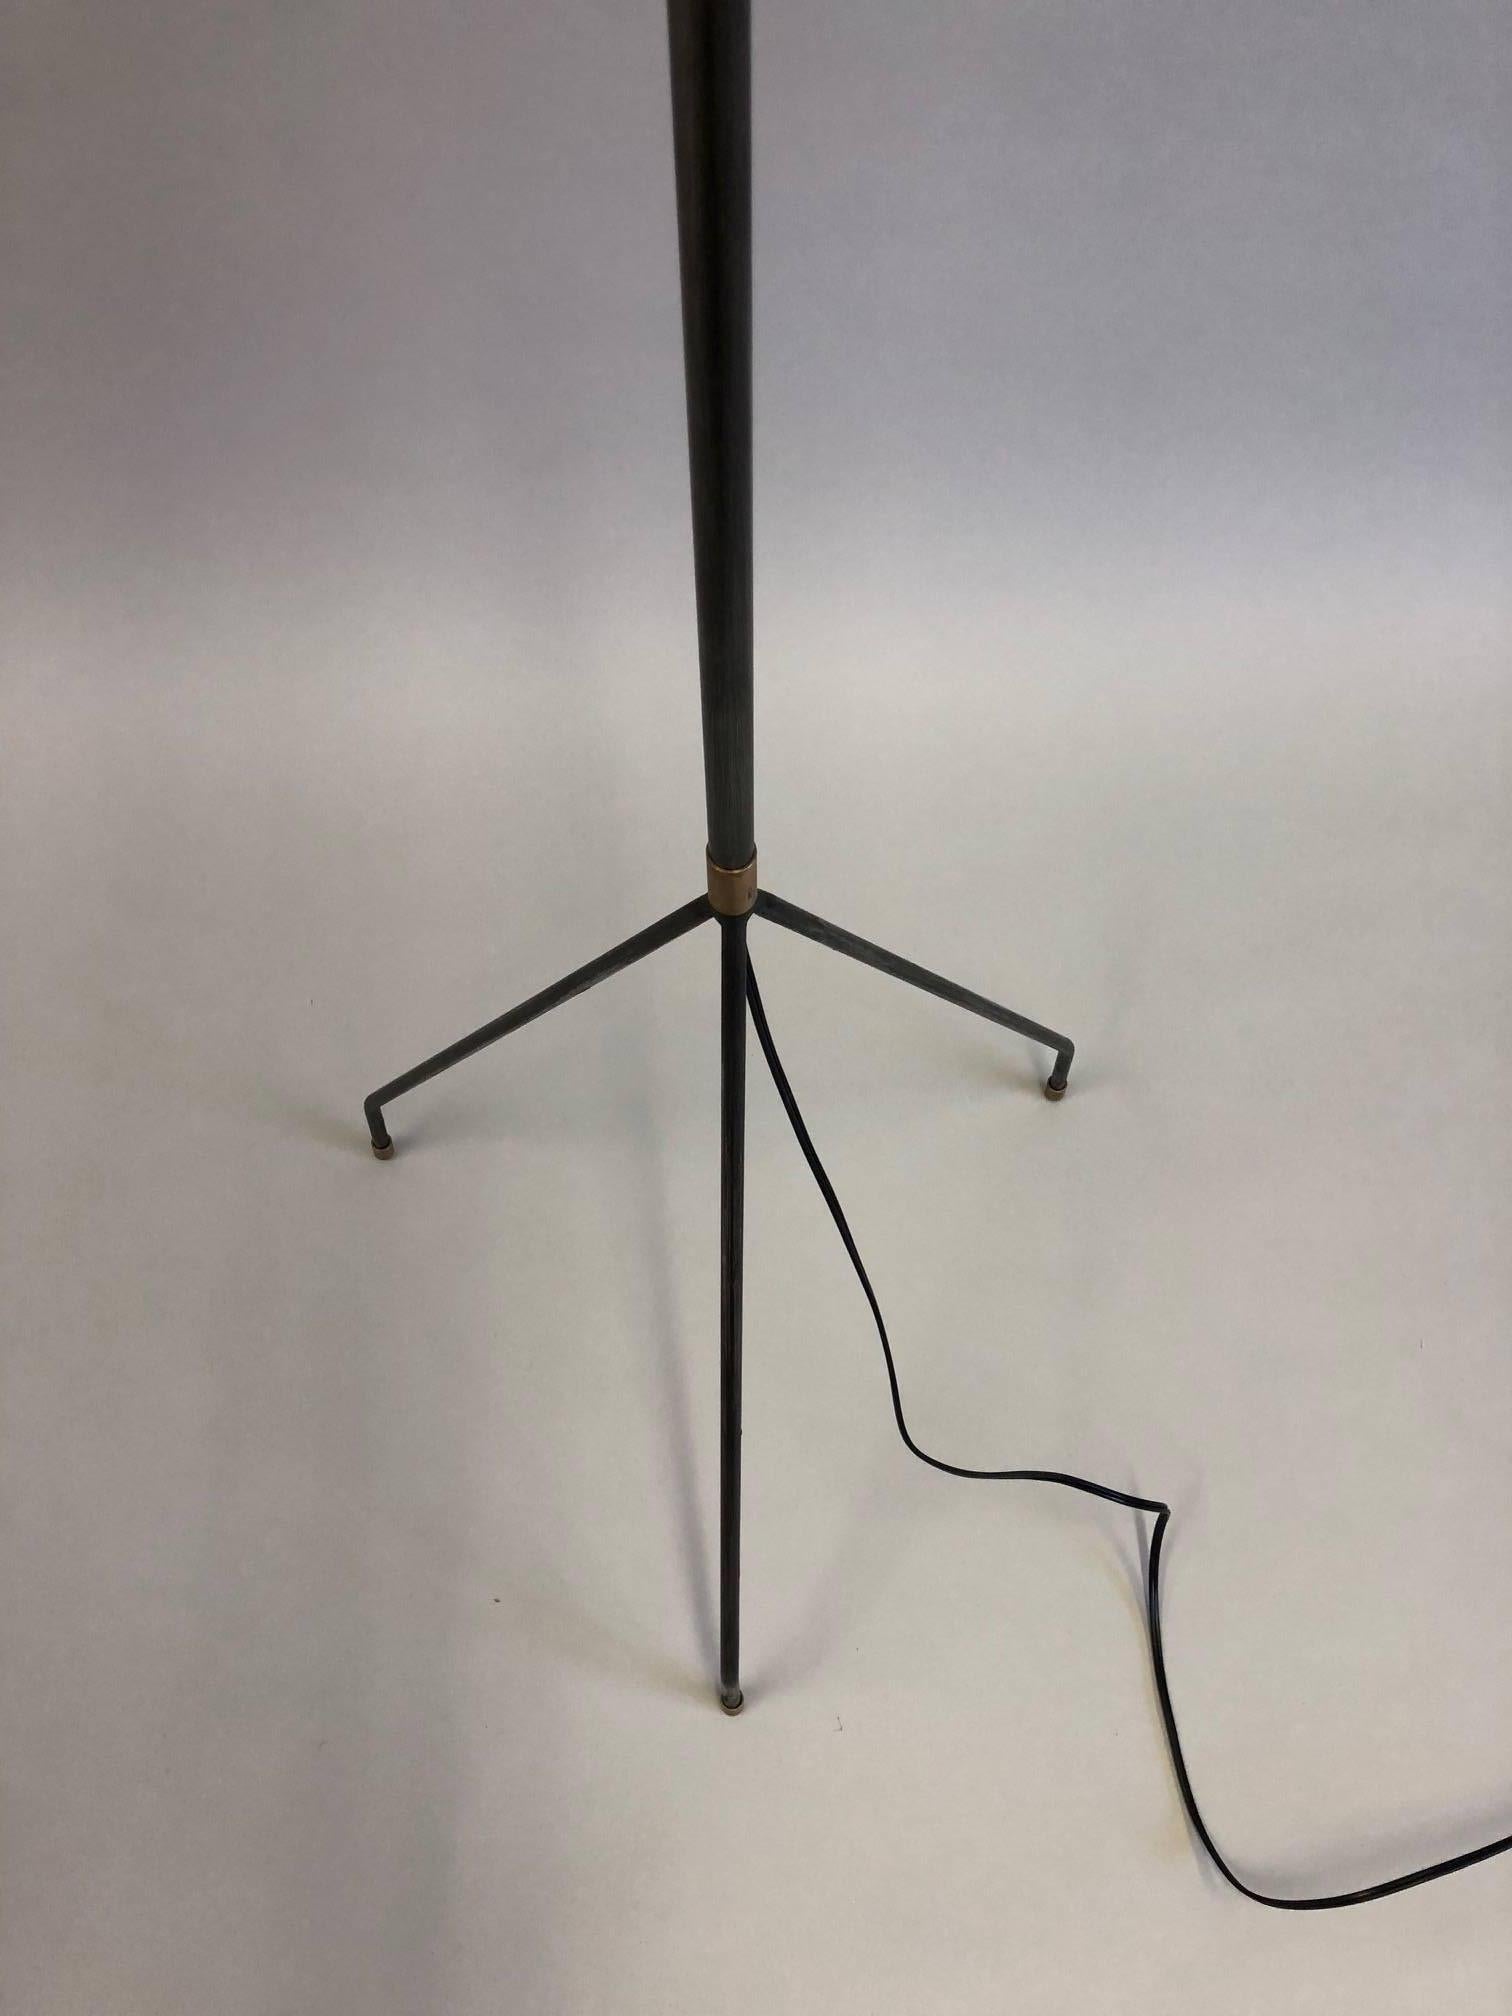 Pair of French Mid-Century Modern Iron Floor Lamps Attributed to Pierre Guariche 1